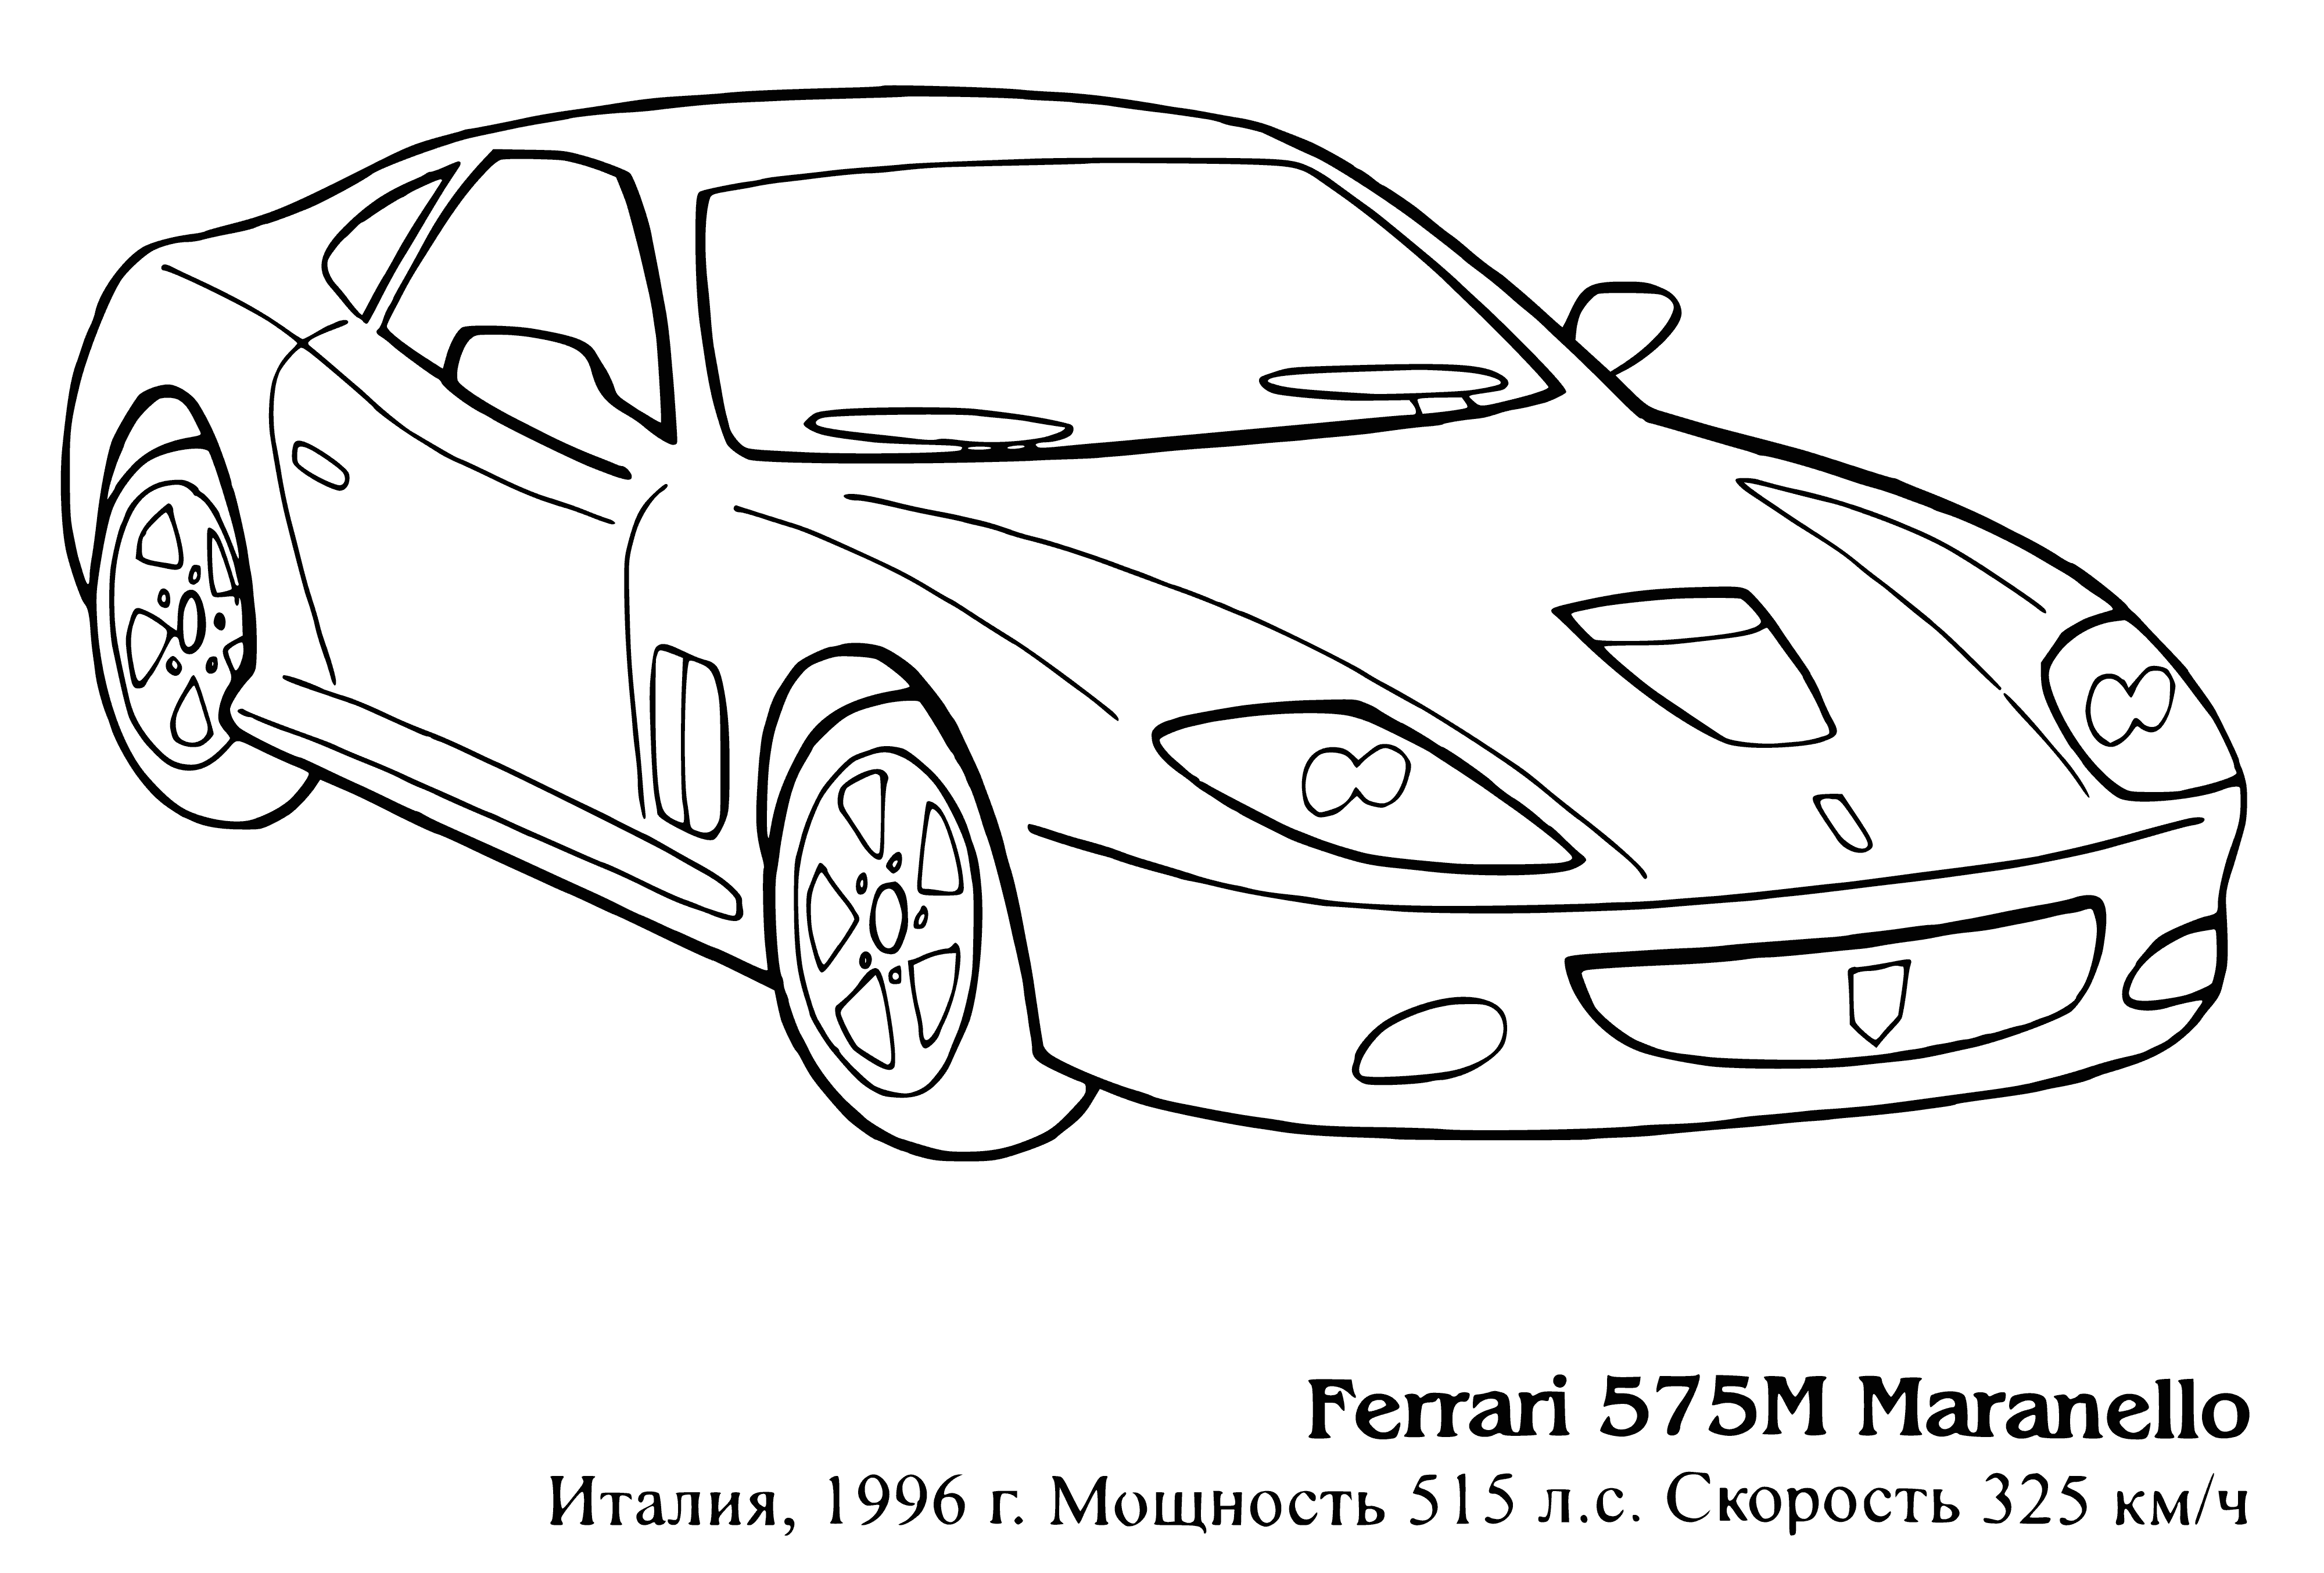 coloring page: A red, two-door car with a large front end, small back end, pointed top, and four round, black headlights, with a black and yellow Ferrari logo parked near a mountain.